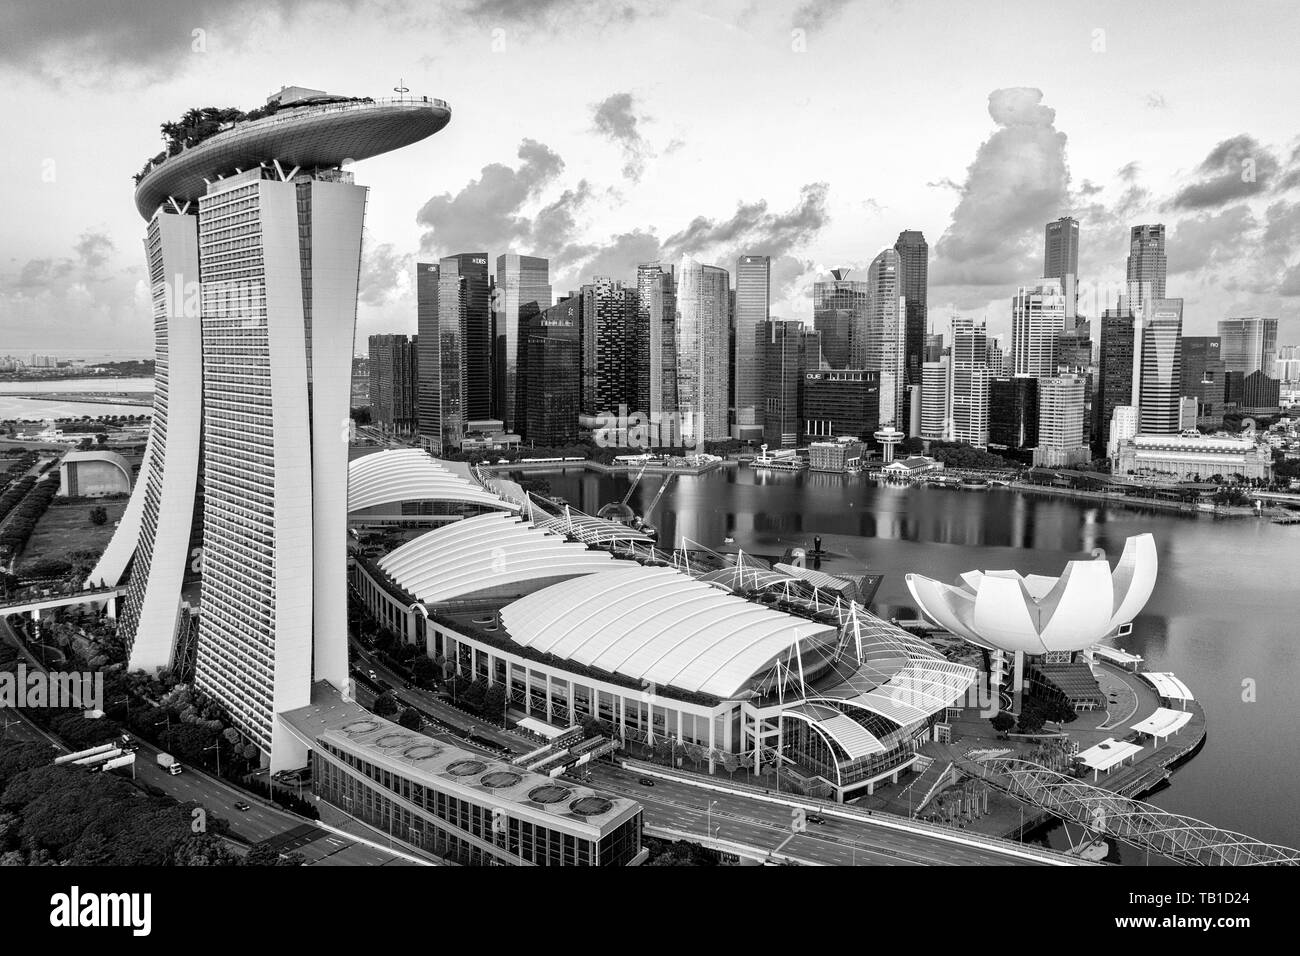 Black and white view of Marina Bay Sands and various skyscrapers from an aerial perspective, Singapore. Stock Photo